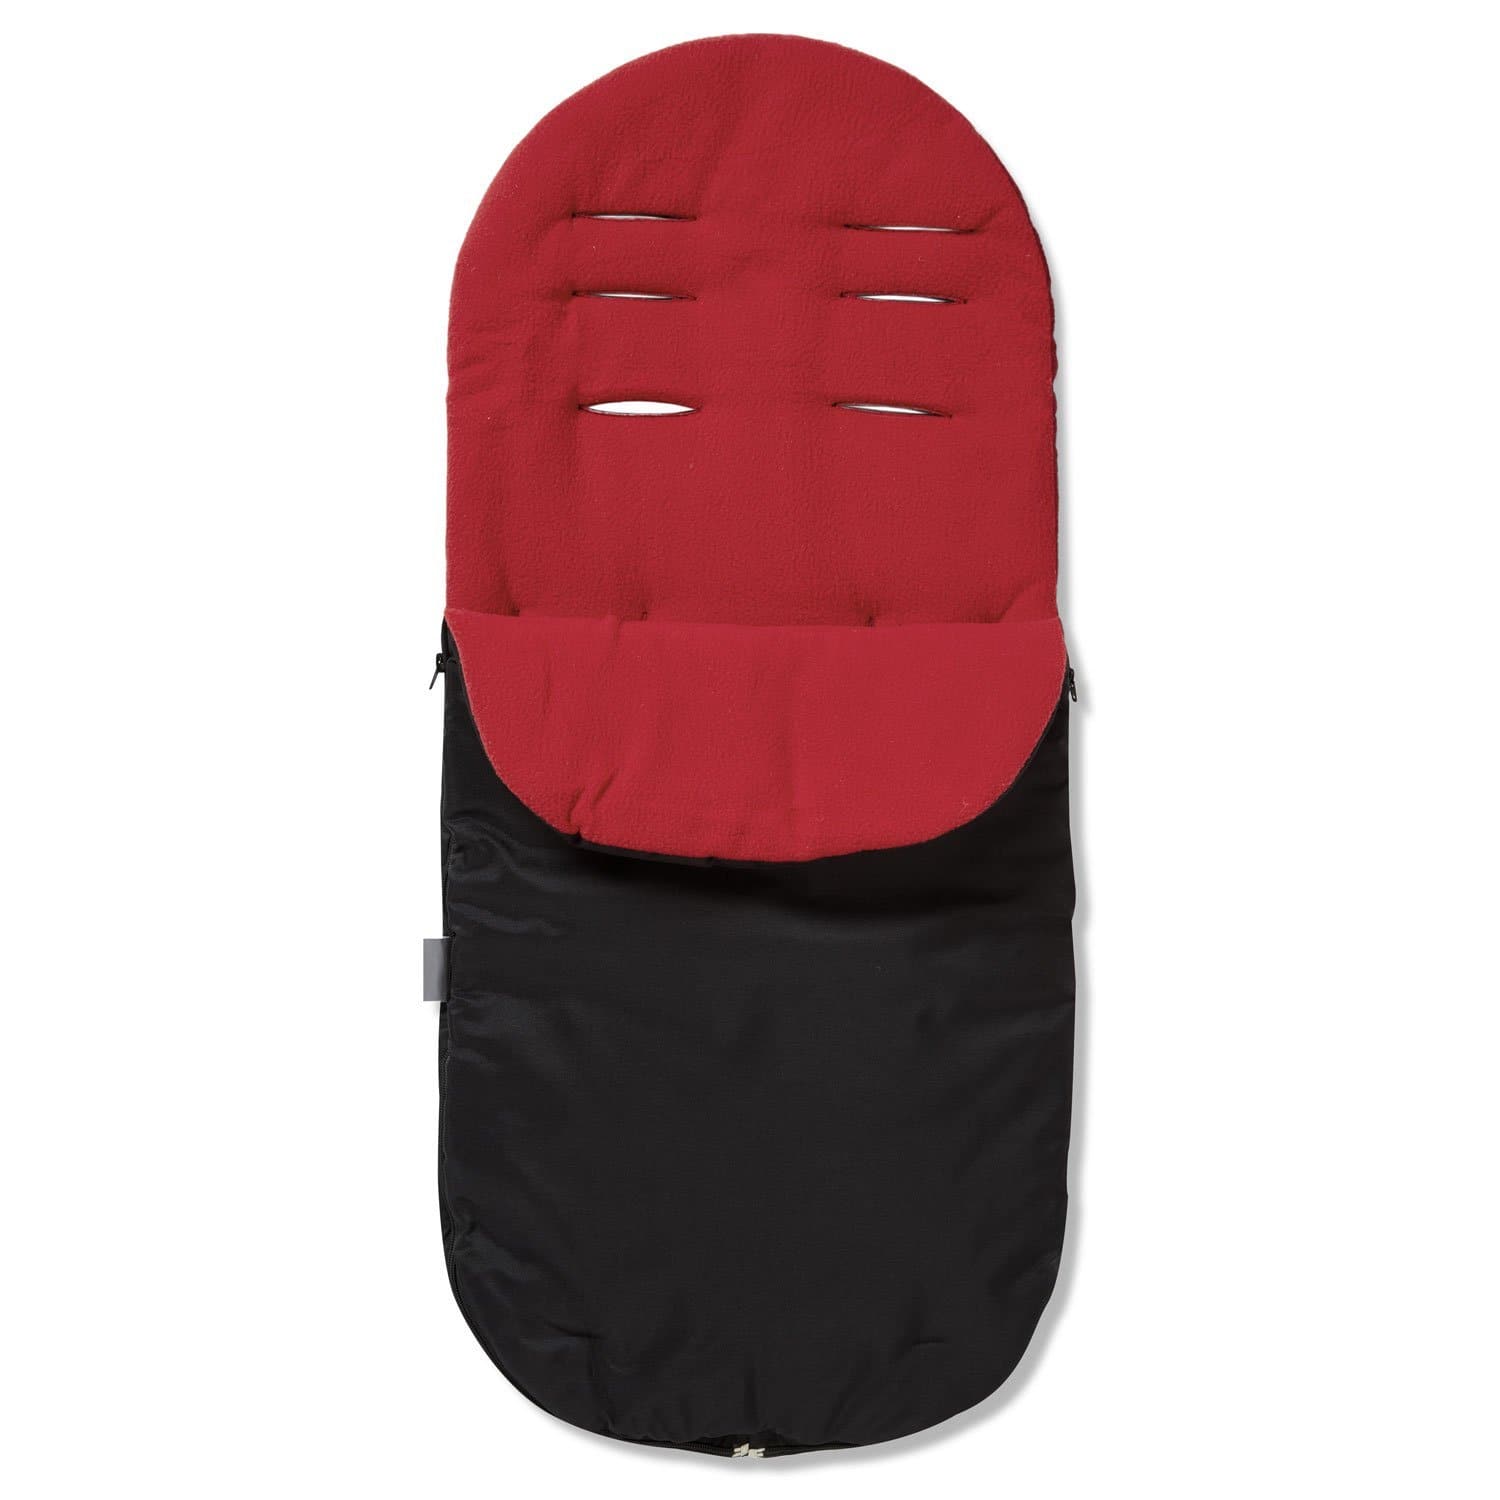 Footmuff / Cosy Toes Compatible with Mamas & Papas - Red / Fits All Models | For Your Little One